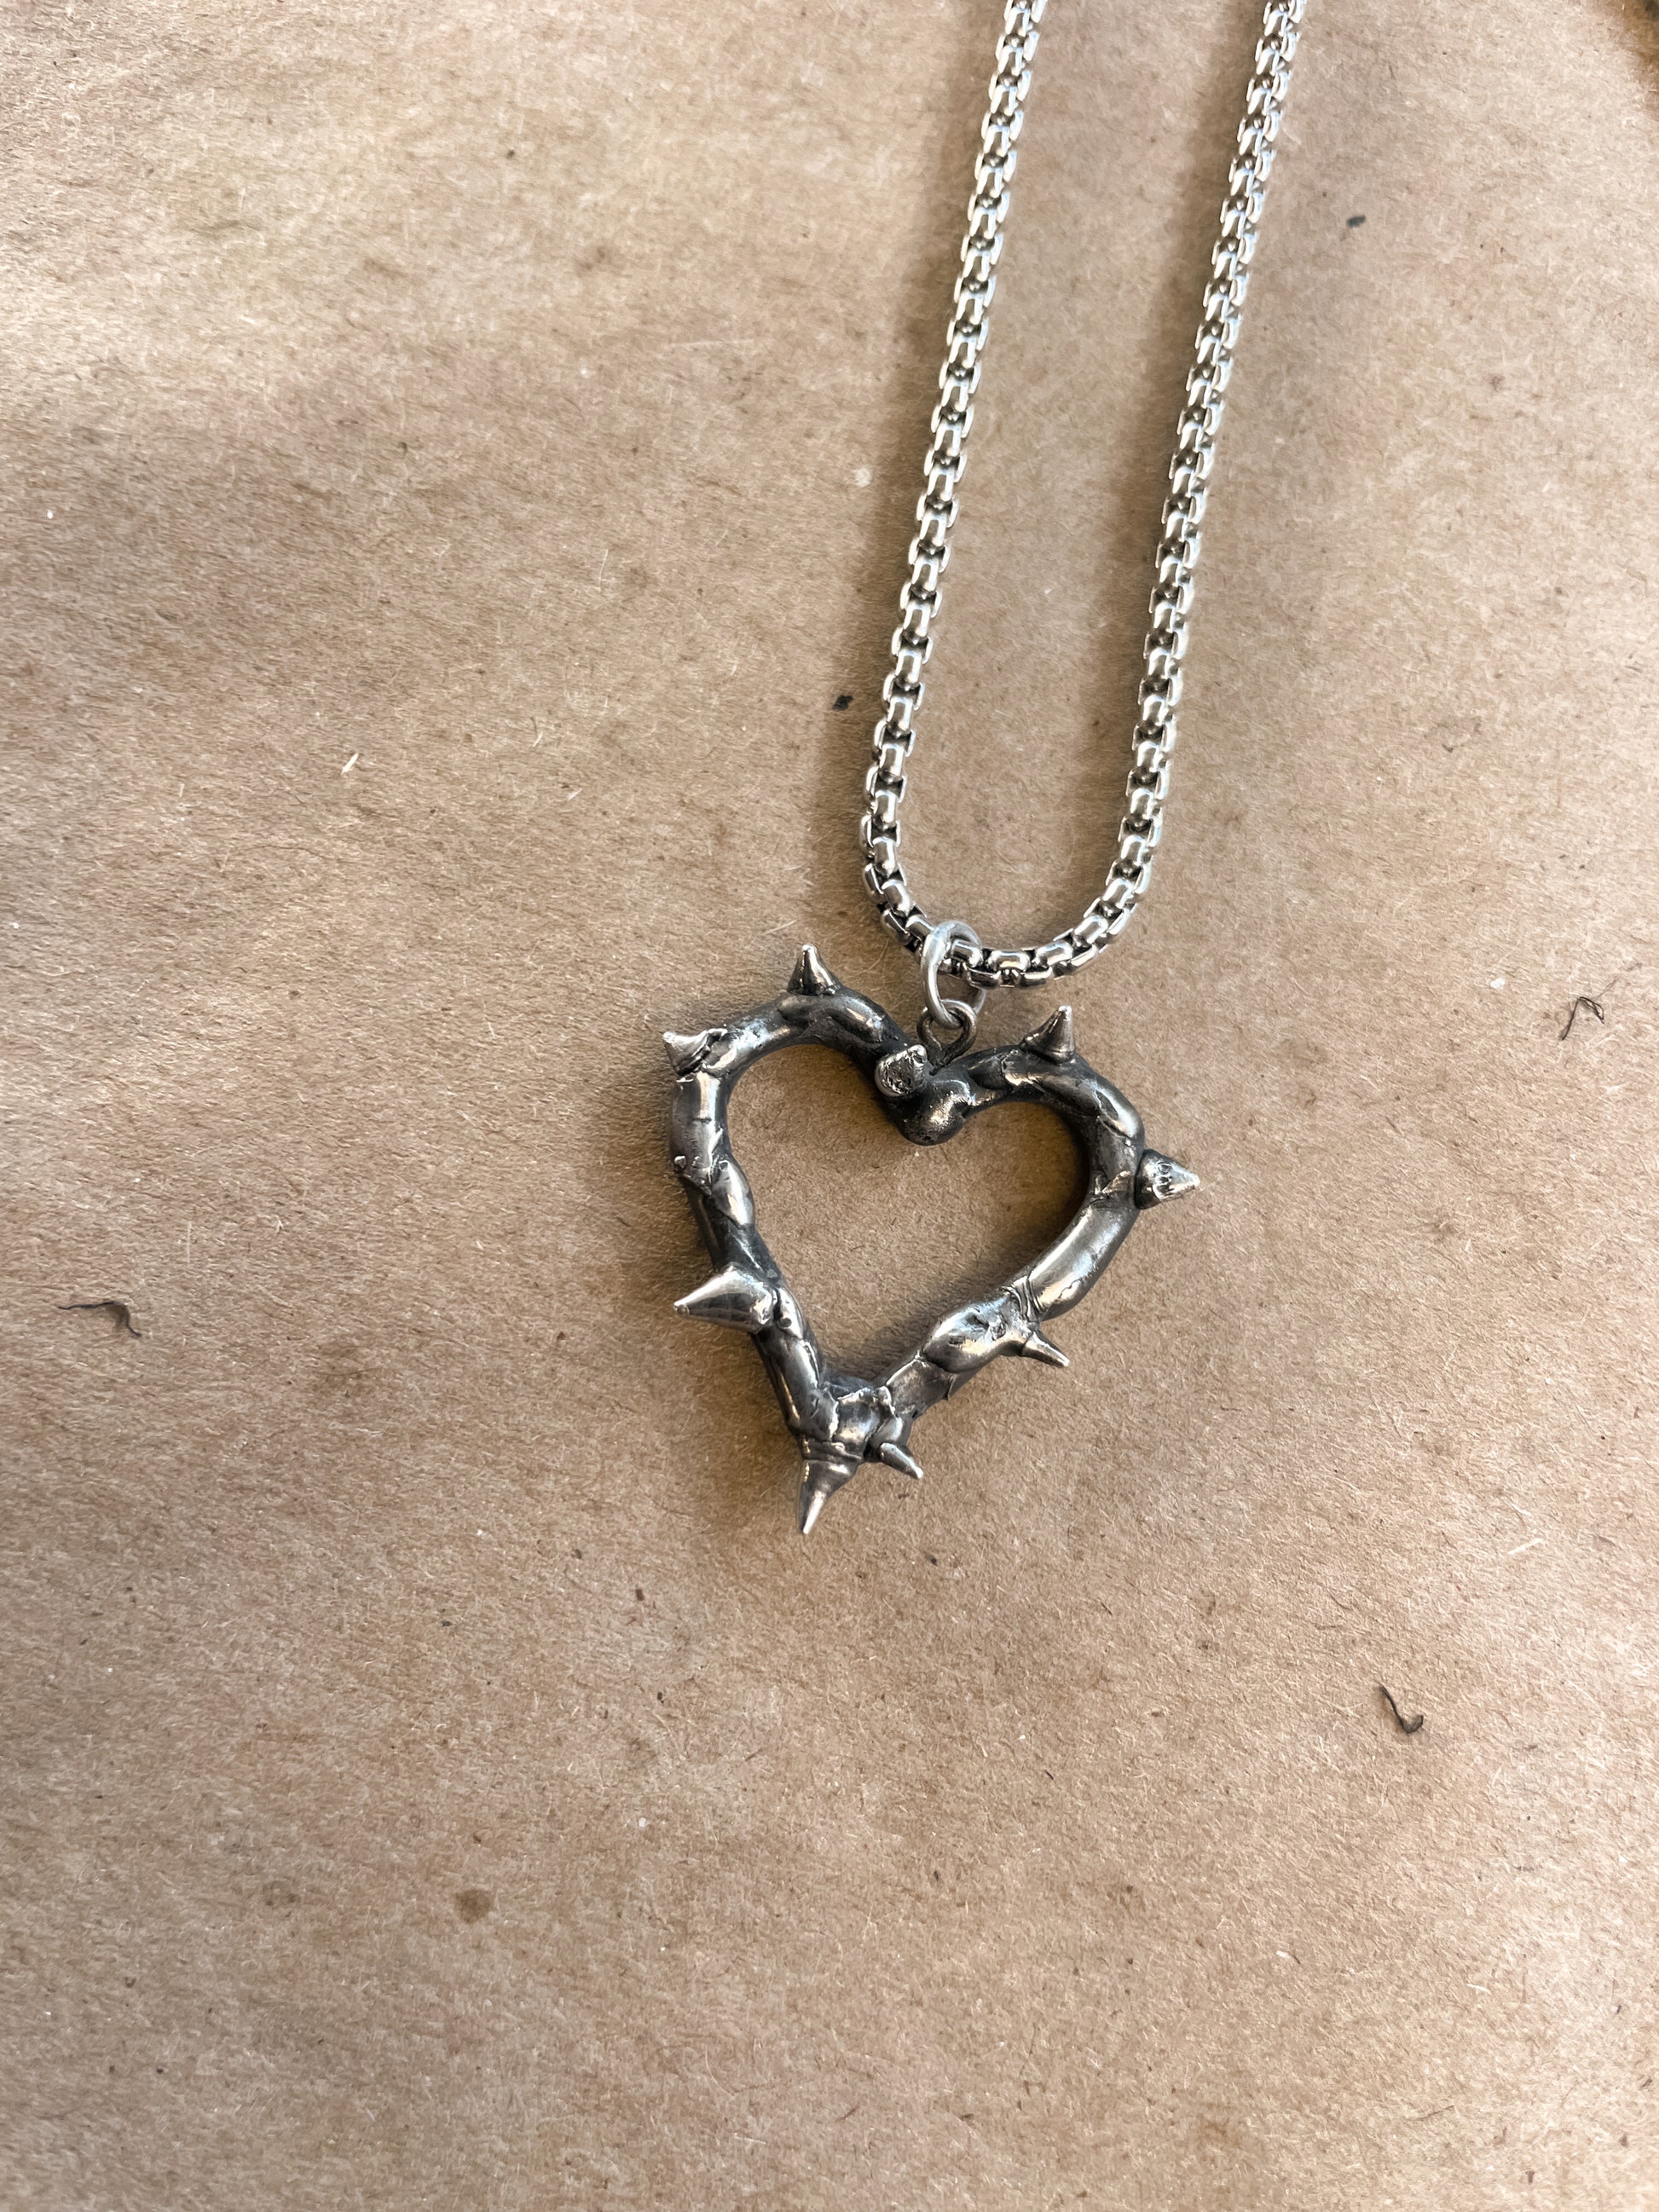 Thorn Heart Charm Silver Heart Thorn Charms Thorn Heart Pendant Thorn Pendant Bramble Heart DIY Jewelry Making 24mm x 25mm